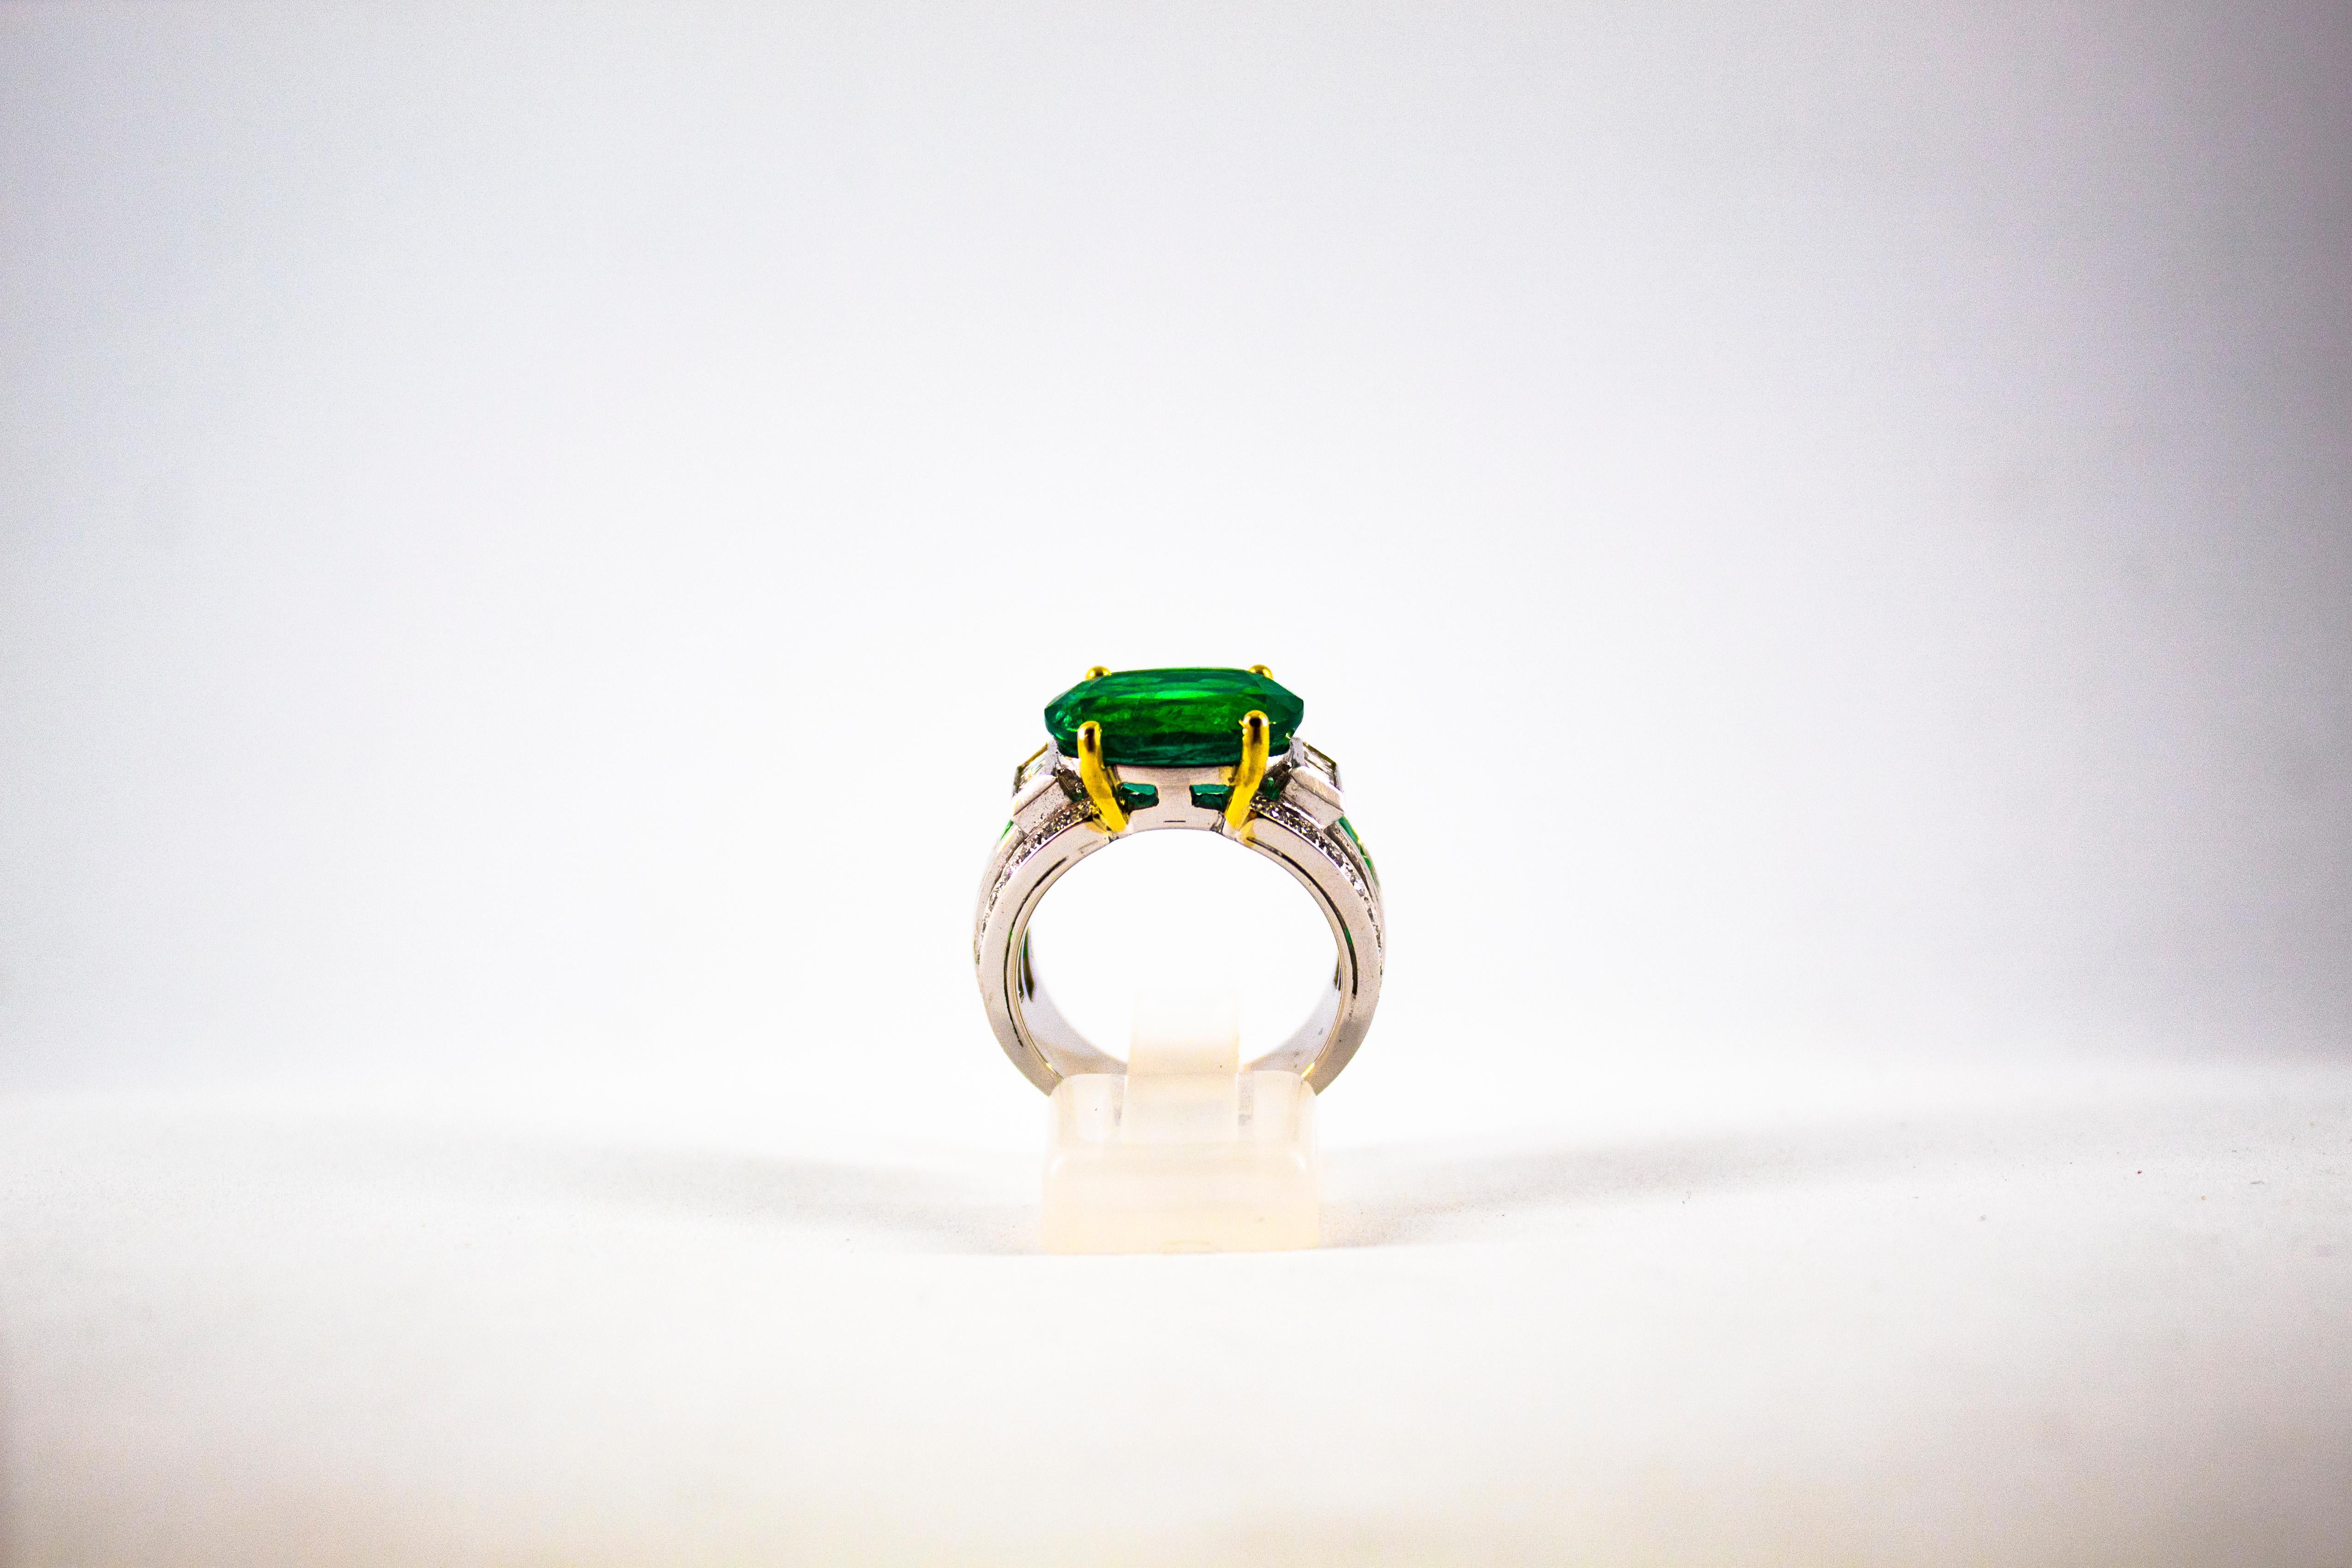 This Ring is made of 18K White Gold.
This Ring has 0.36 Carats of Carré Cut White Diamonds.
This Ring has 0.46 Carats of White Diamonds.
This Ring has a 5.93 Carats Zambia Emerald.
This Ring has 1.00 Carats of Carré Cut Colombia Emeralds.
This Ring